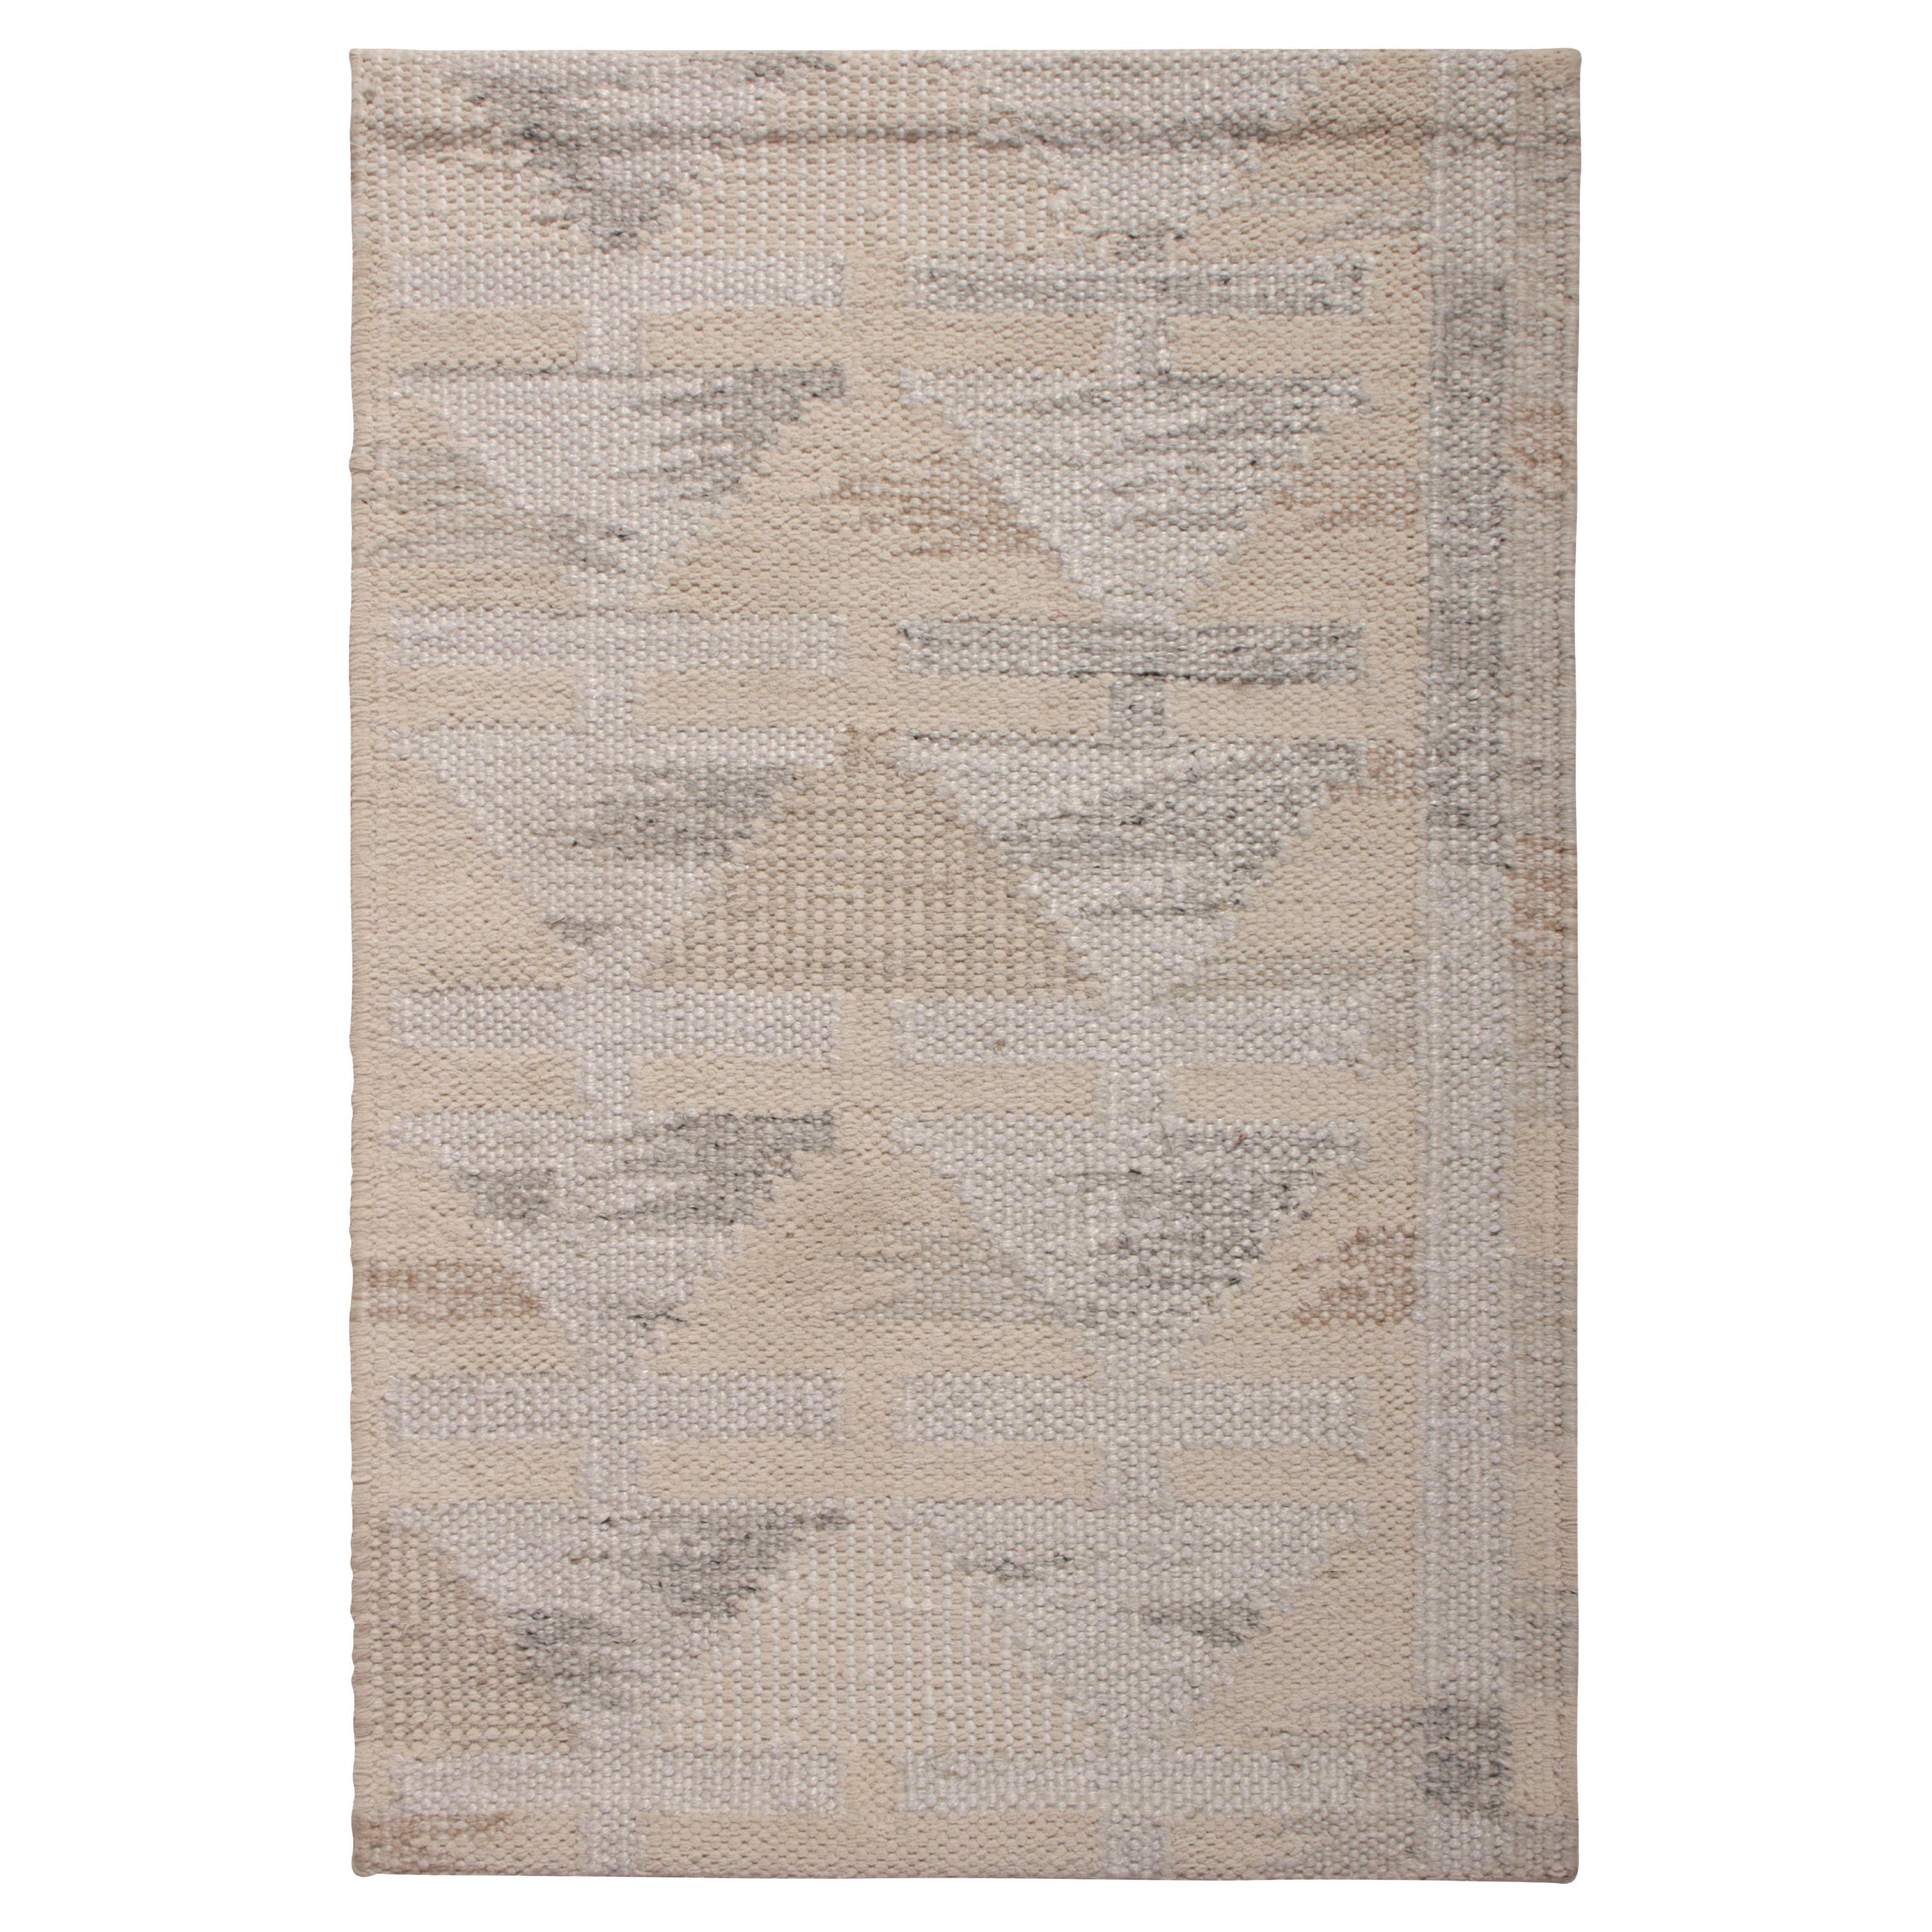 Rug & Kilim’s Scandinavian Style Gift-Size Kilim in Gray and Beige Patterns